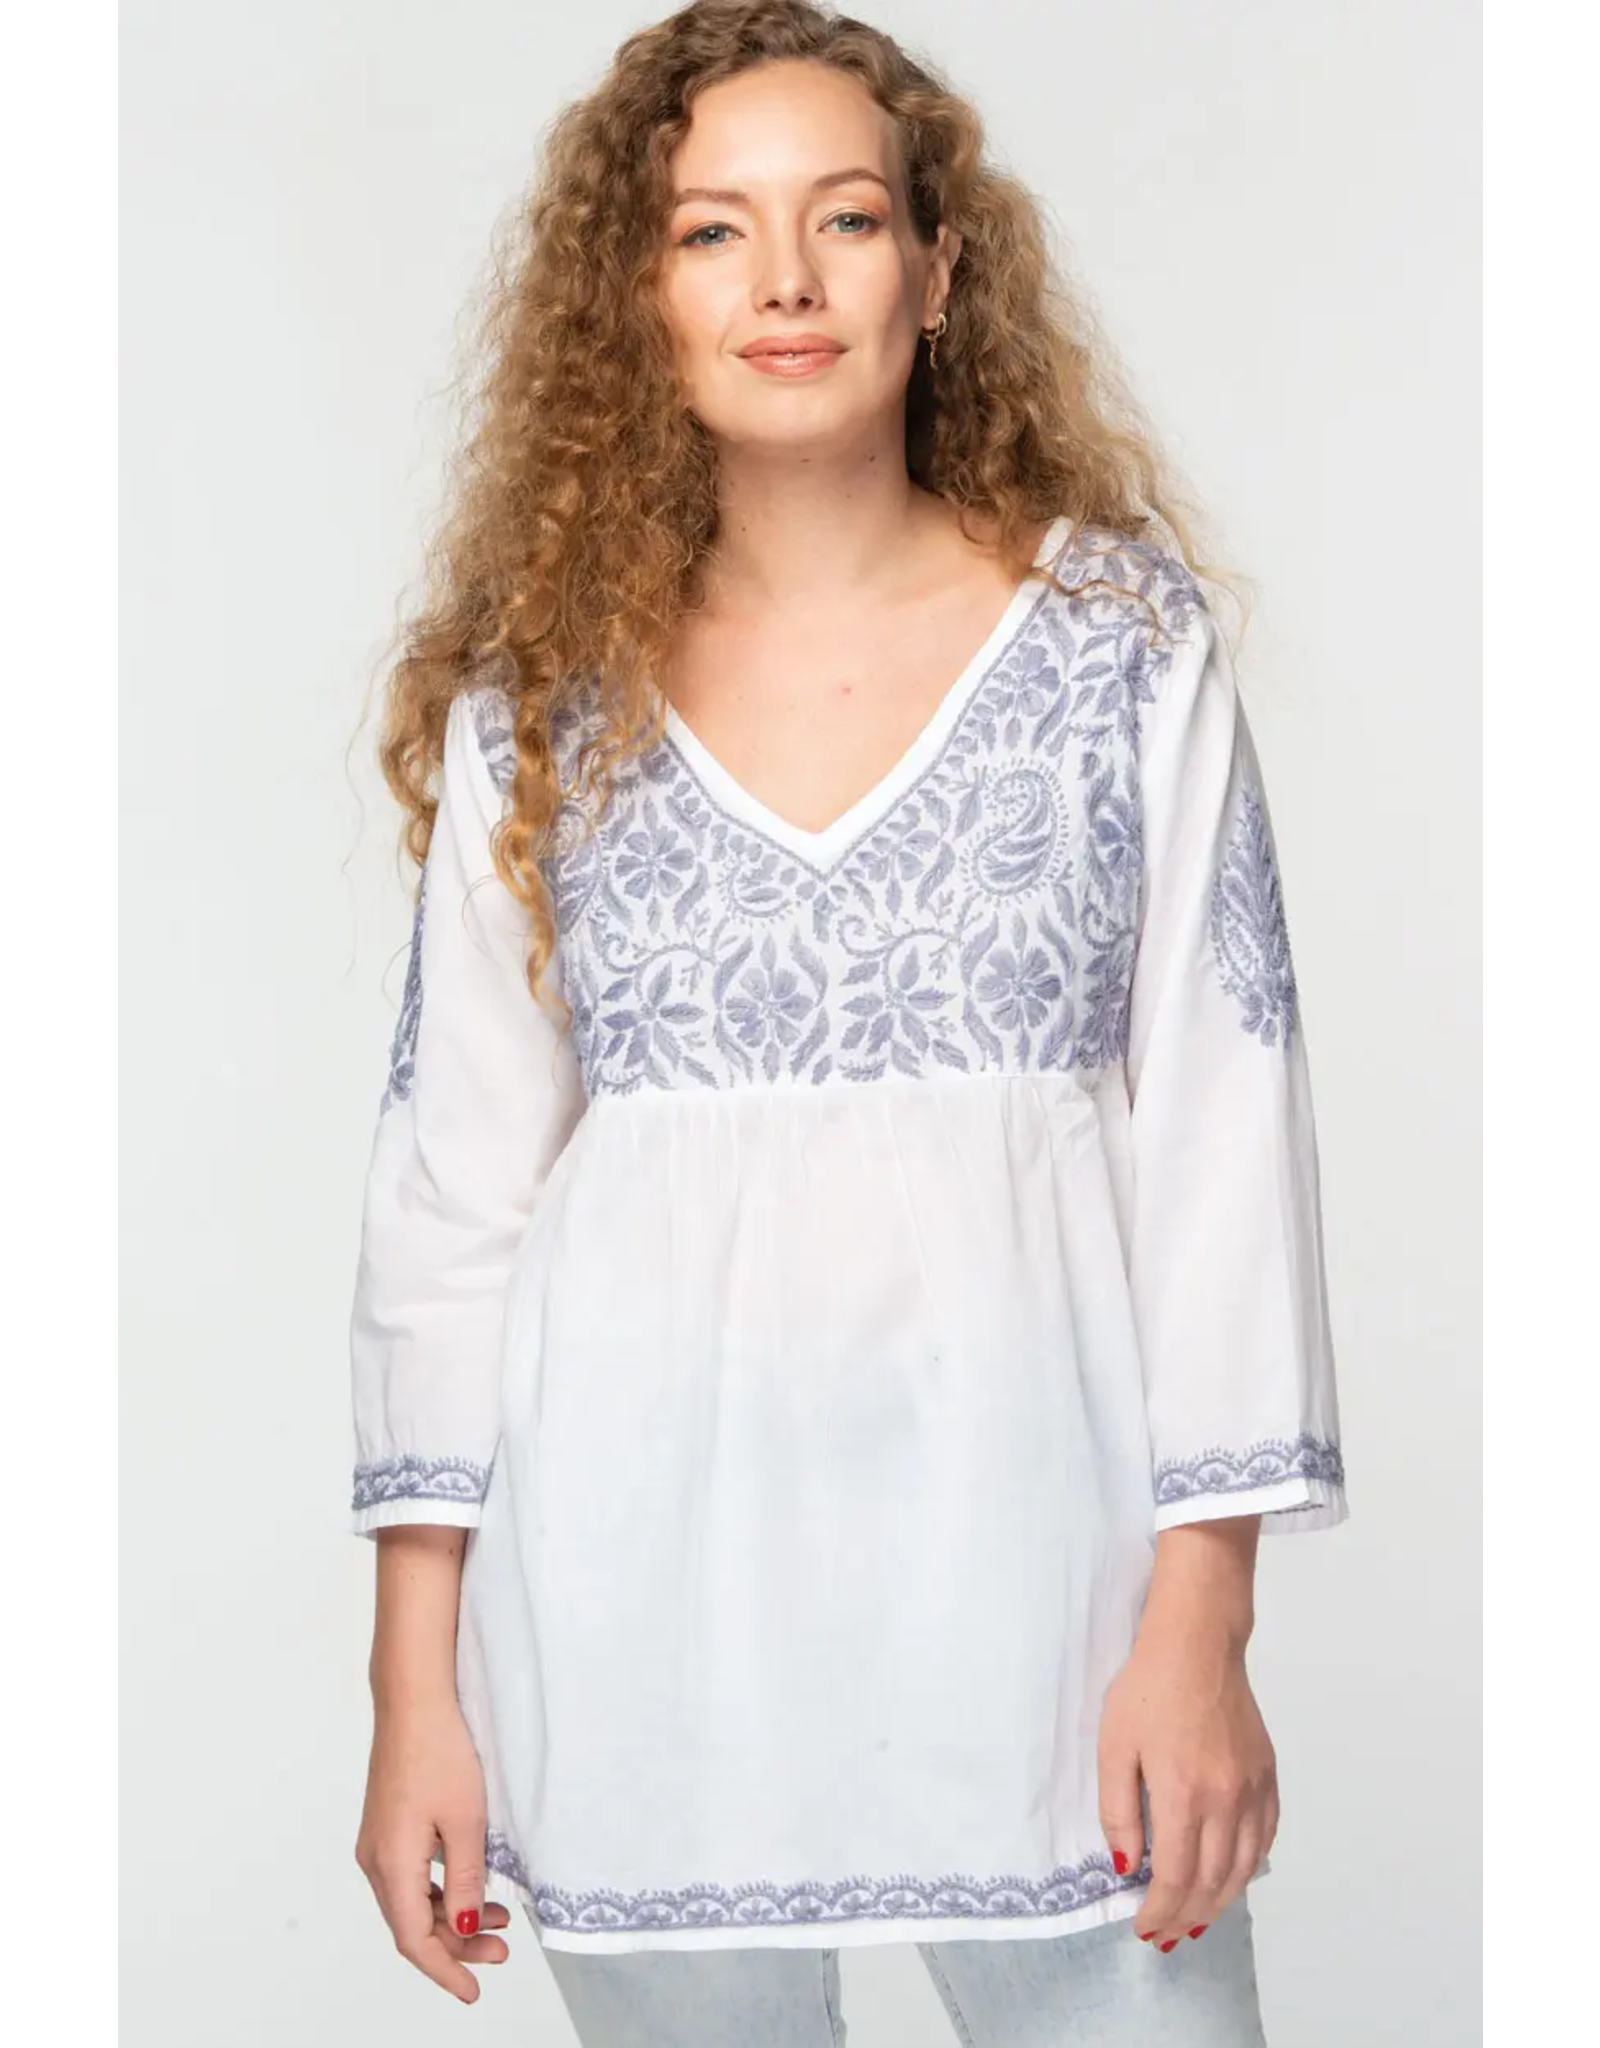 Trade roots Ramani Cotton White and Lavender Embroidered Tunic